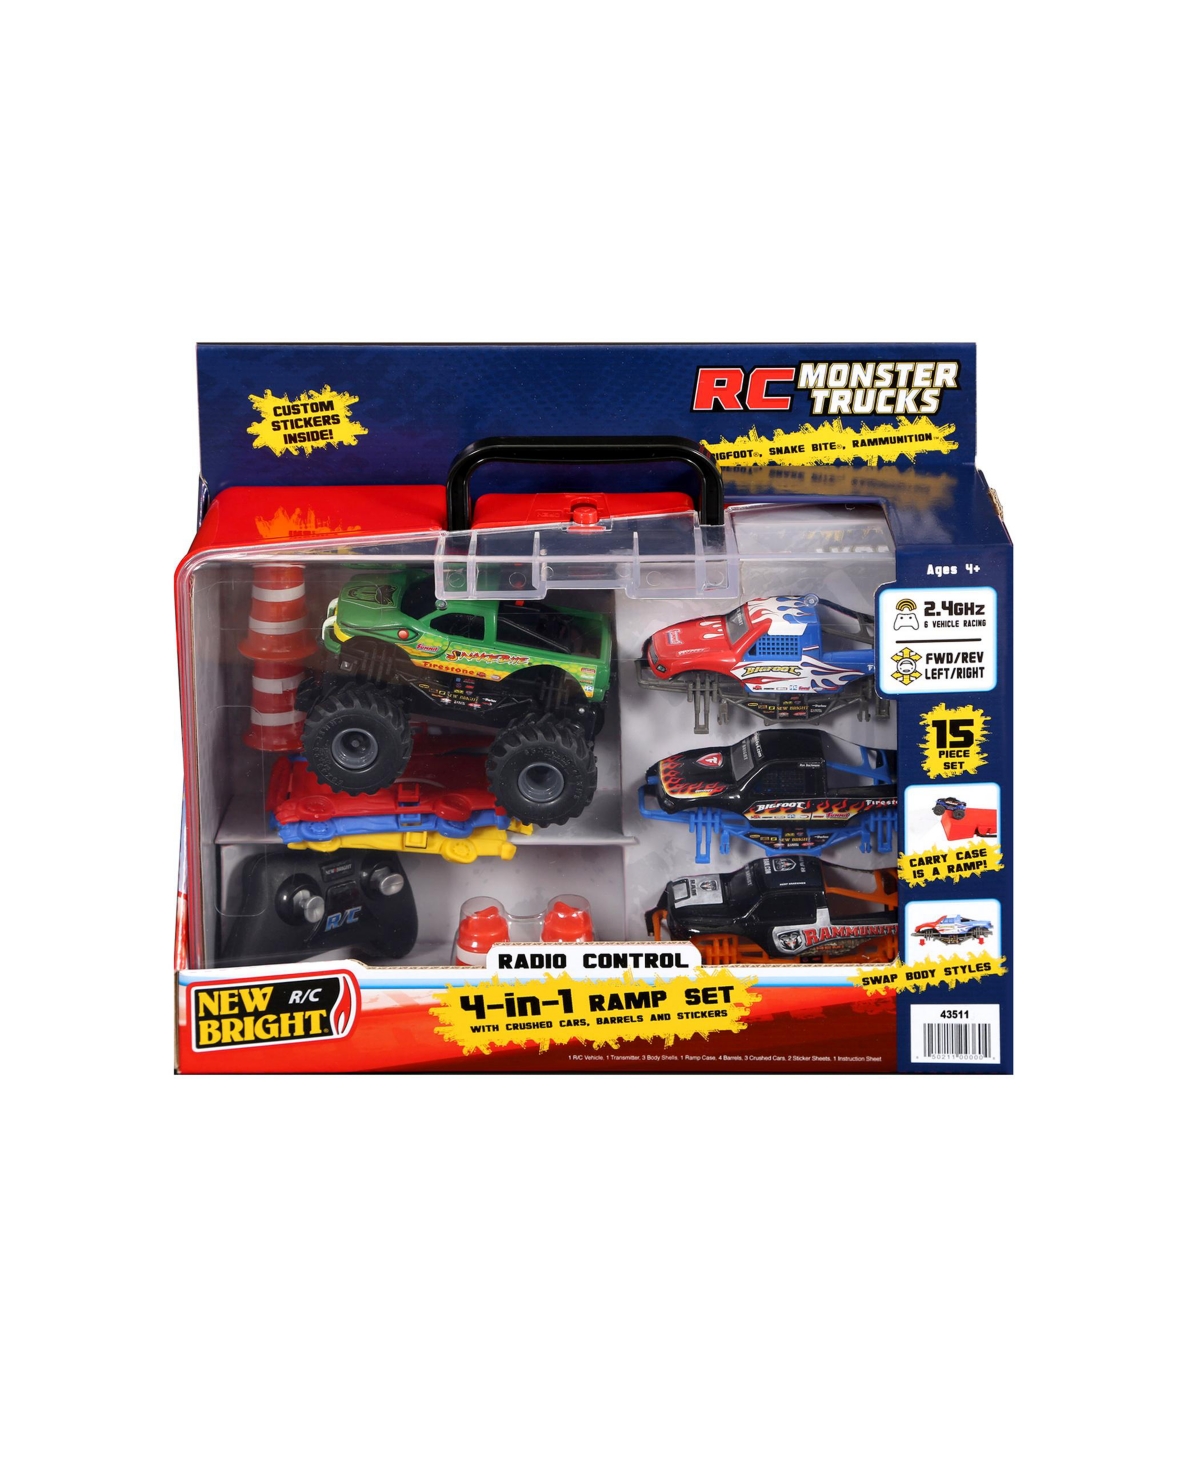 New Bright Kids' 1:43 Remote Control Monster Truck 4 In 1 Ramp Set, 13 Pieces In Multi